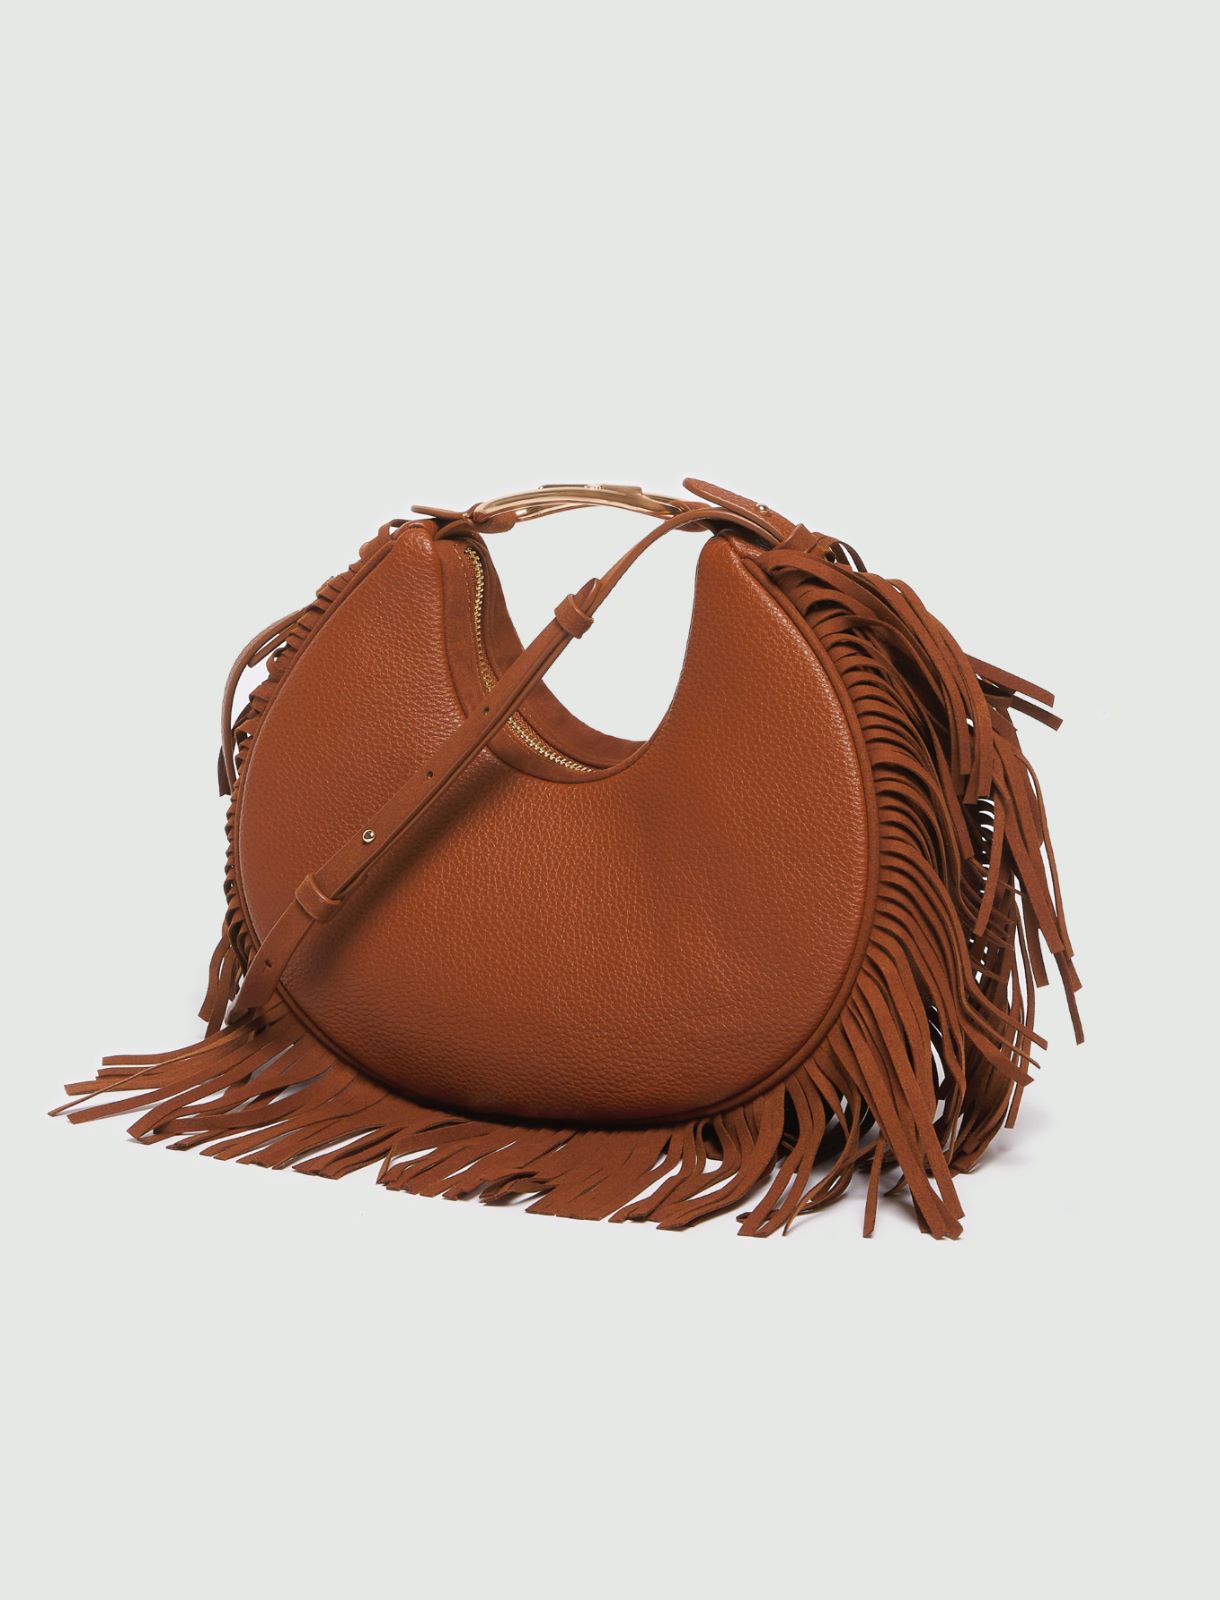 Small bag with fringes - Tobacco - Marella - 2